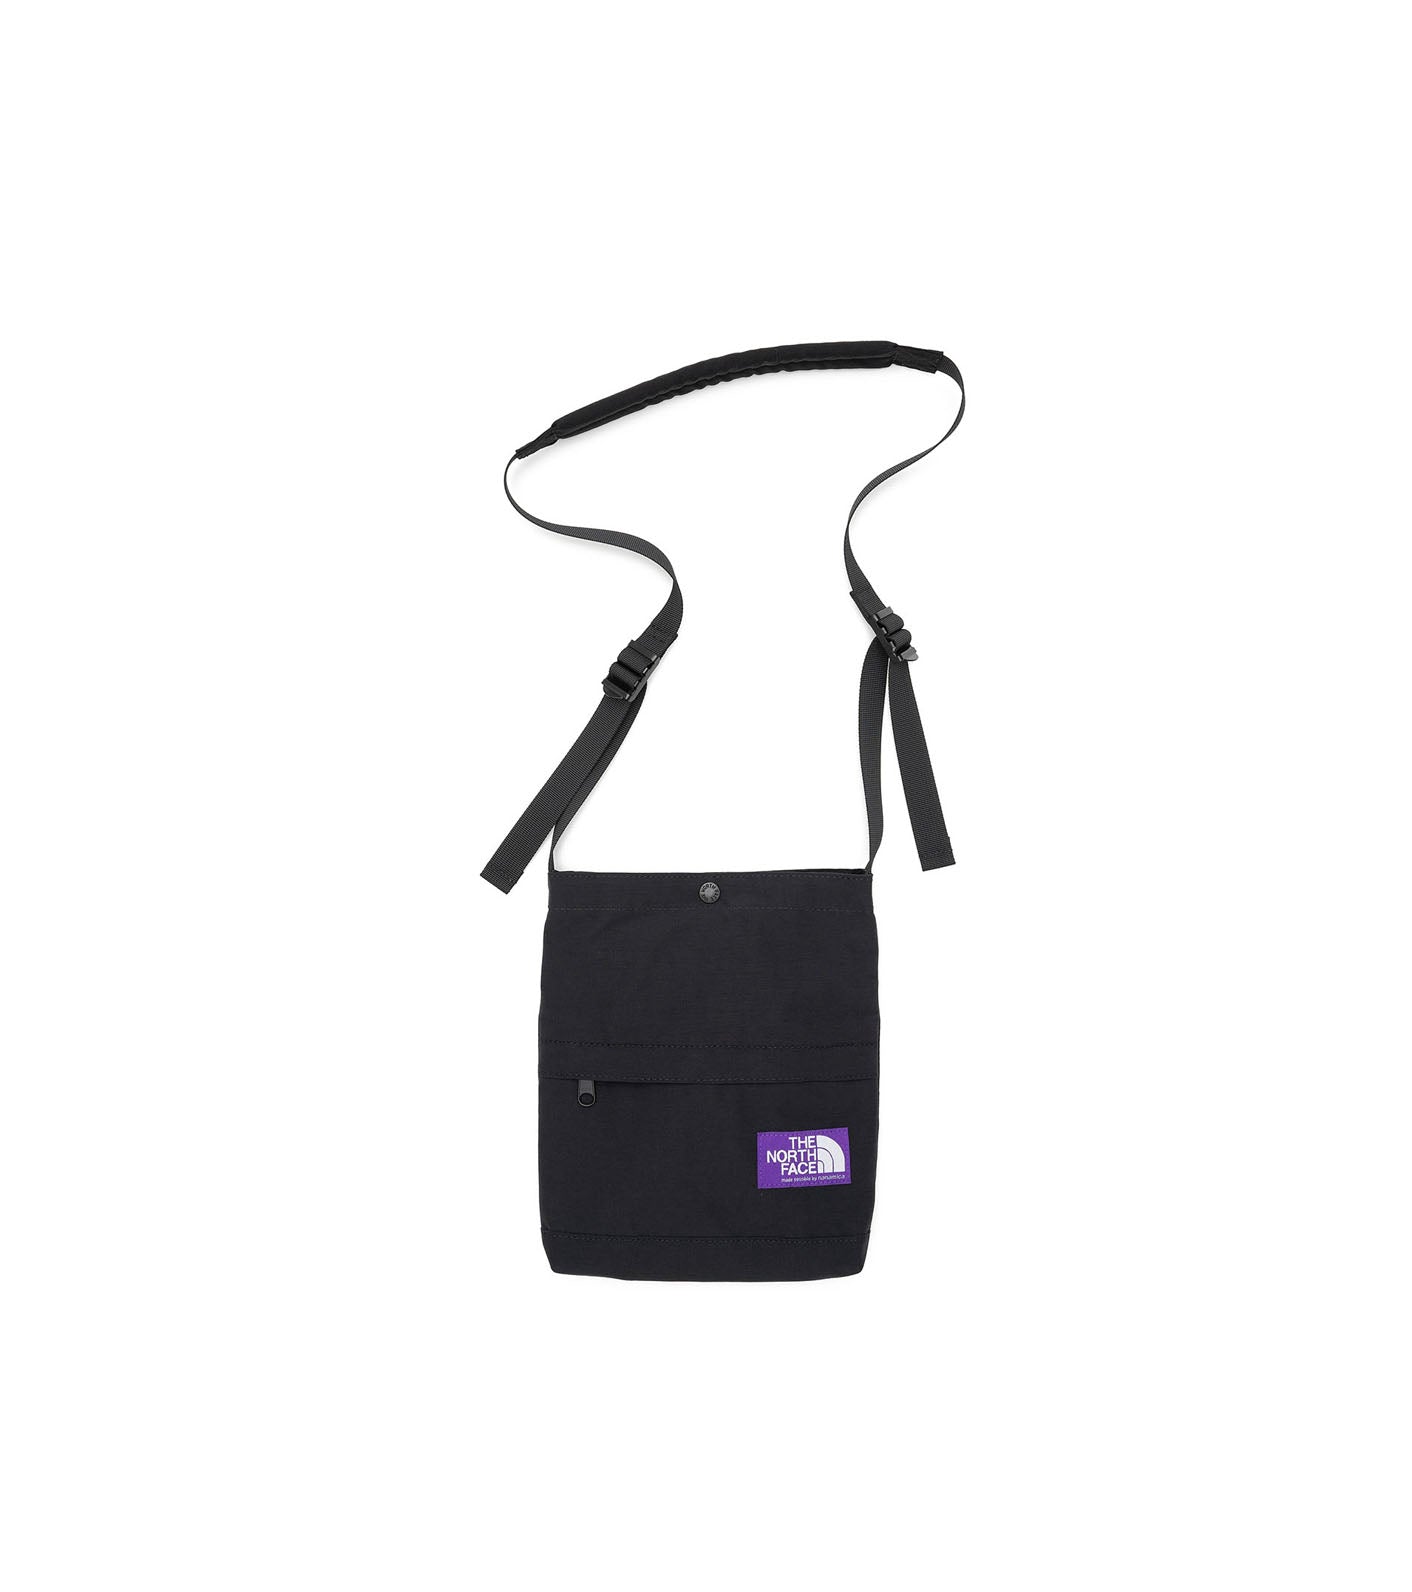 THE NORTH FACE PURPLE LABEL Field Small Shoulder Bag